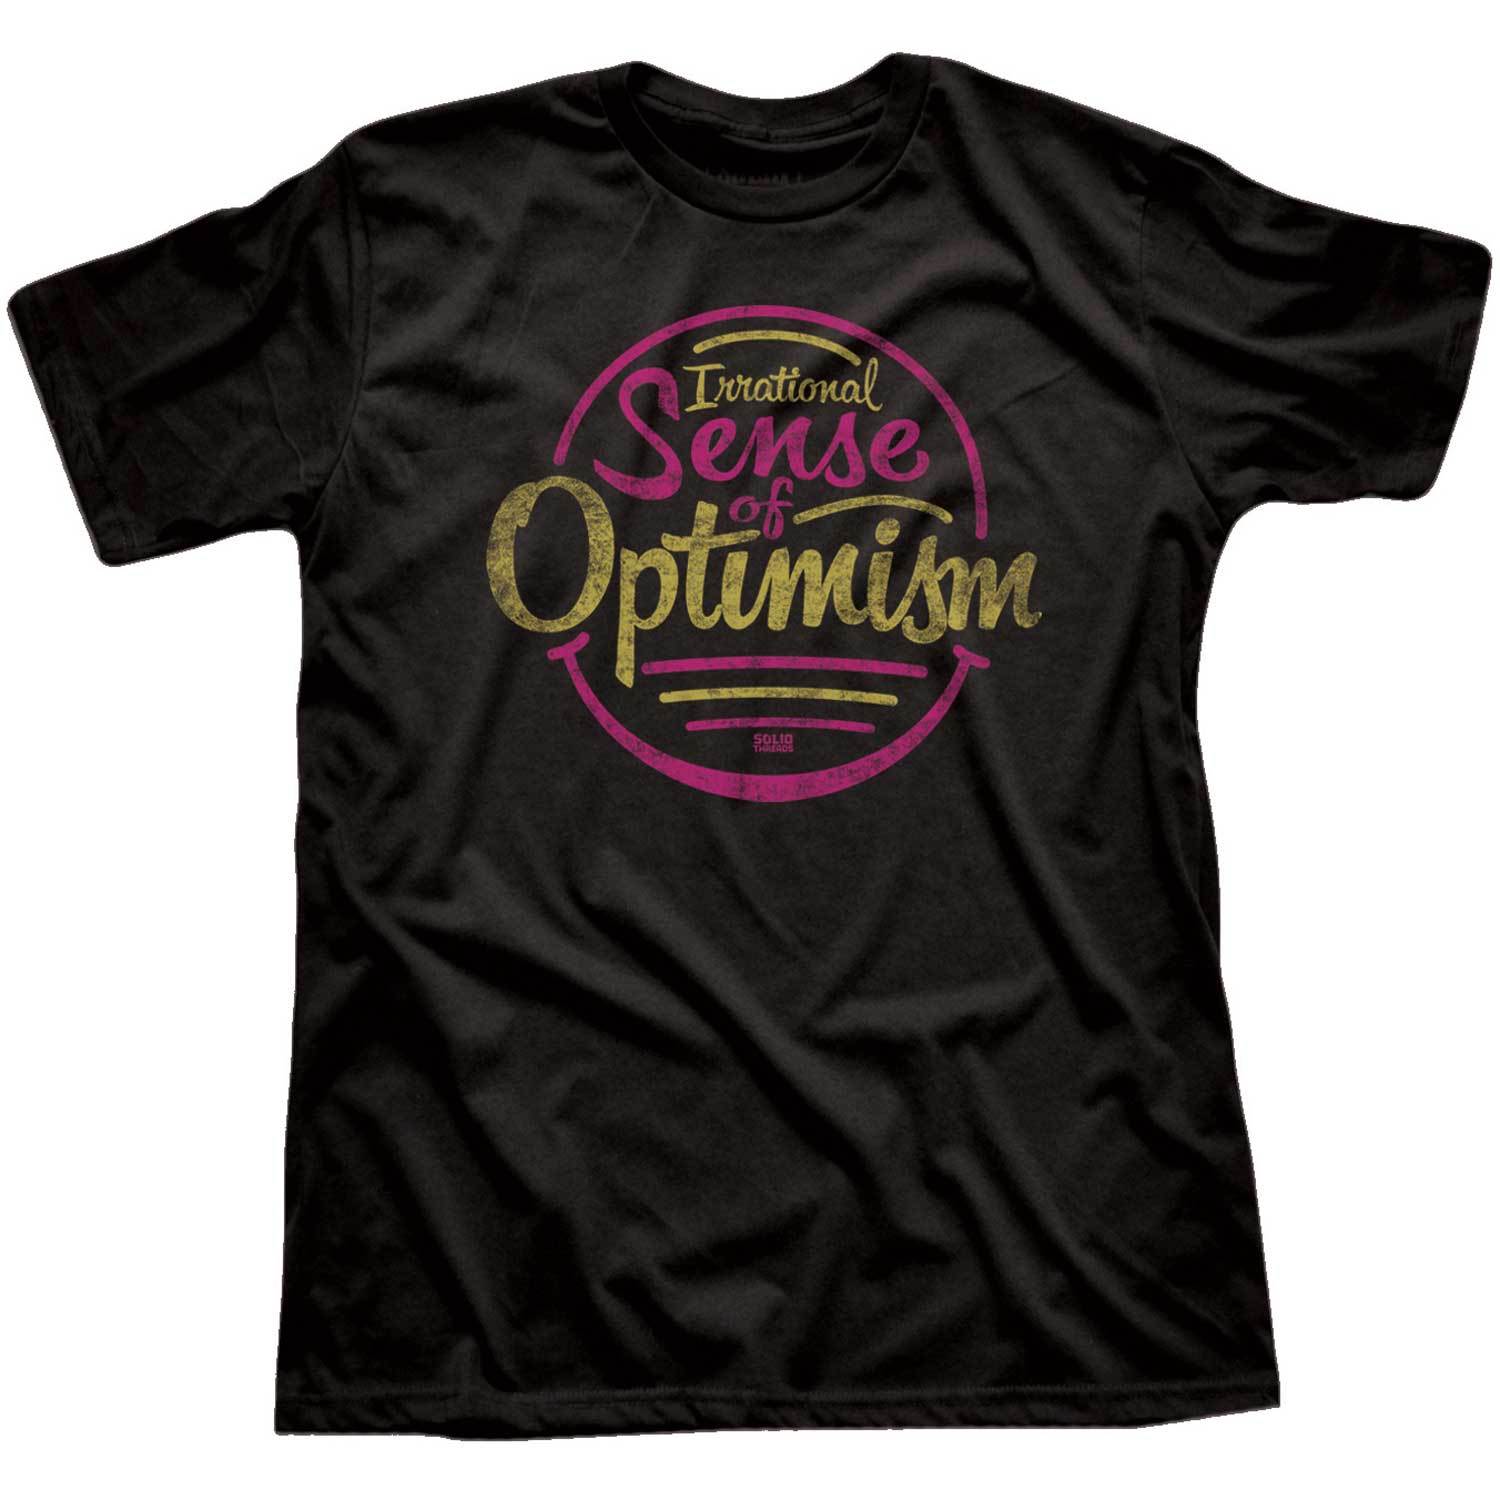 Irrational Sense of Optimism Vintage Inspired Tee-shirt with Retro Positivity Graphic | Solid Threads